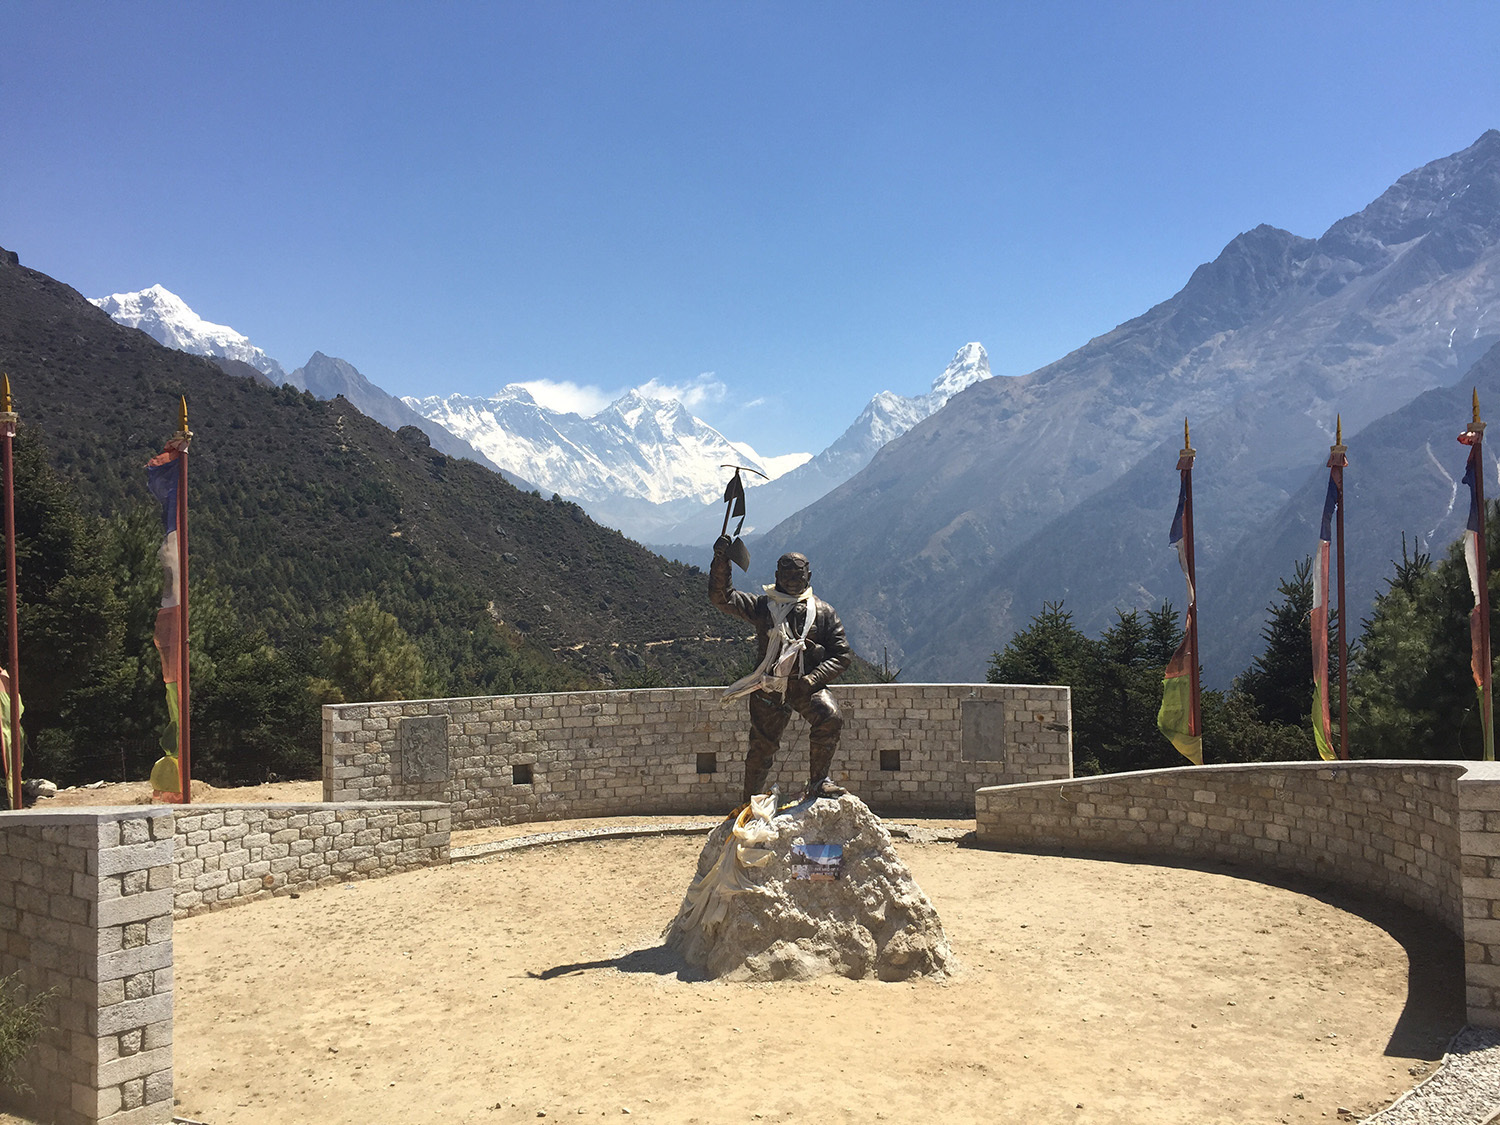 Statue of Tenzing Norgay Sherpa at Namche Bazar with Everest, Lhotse and Ama Dablam in the background.